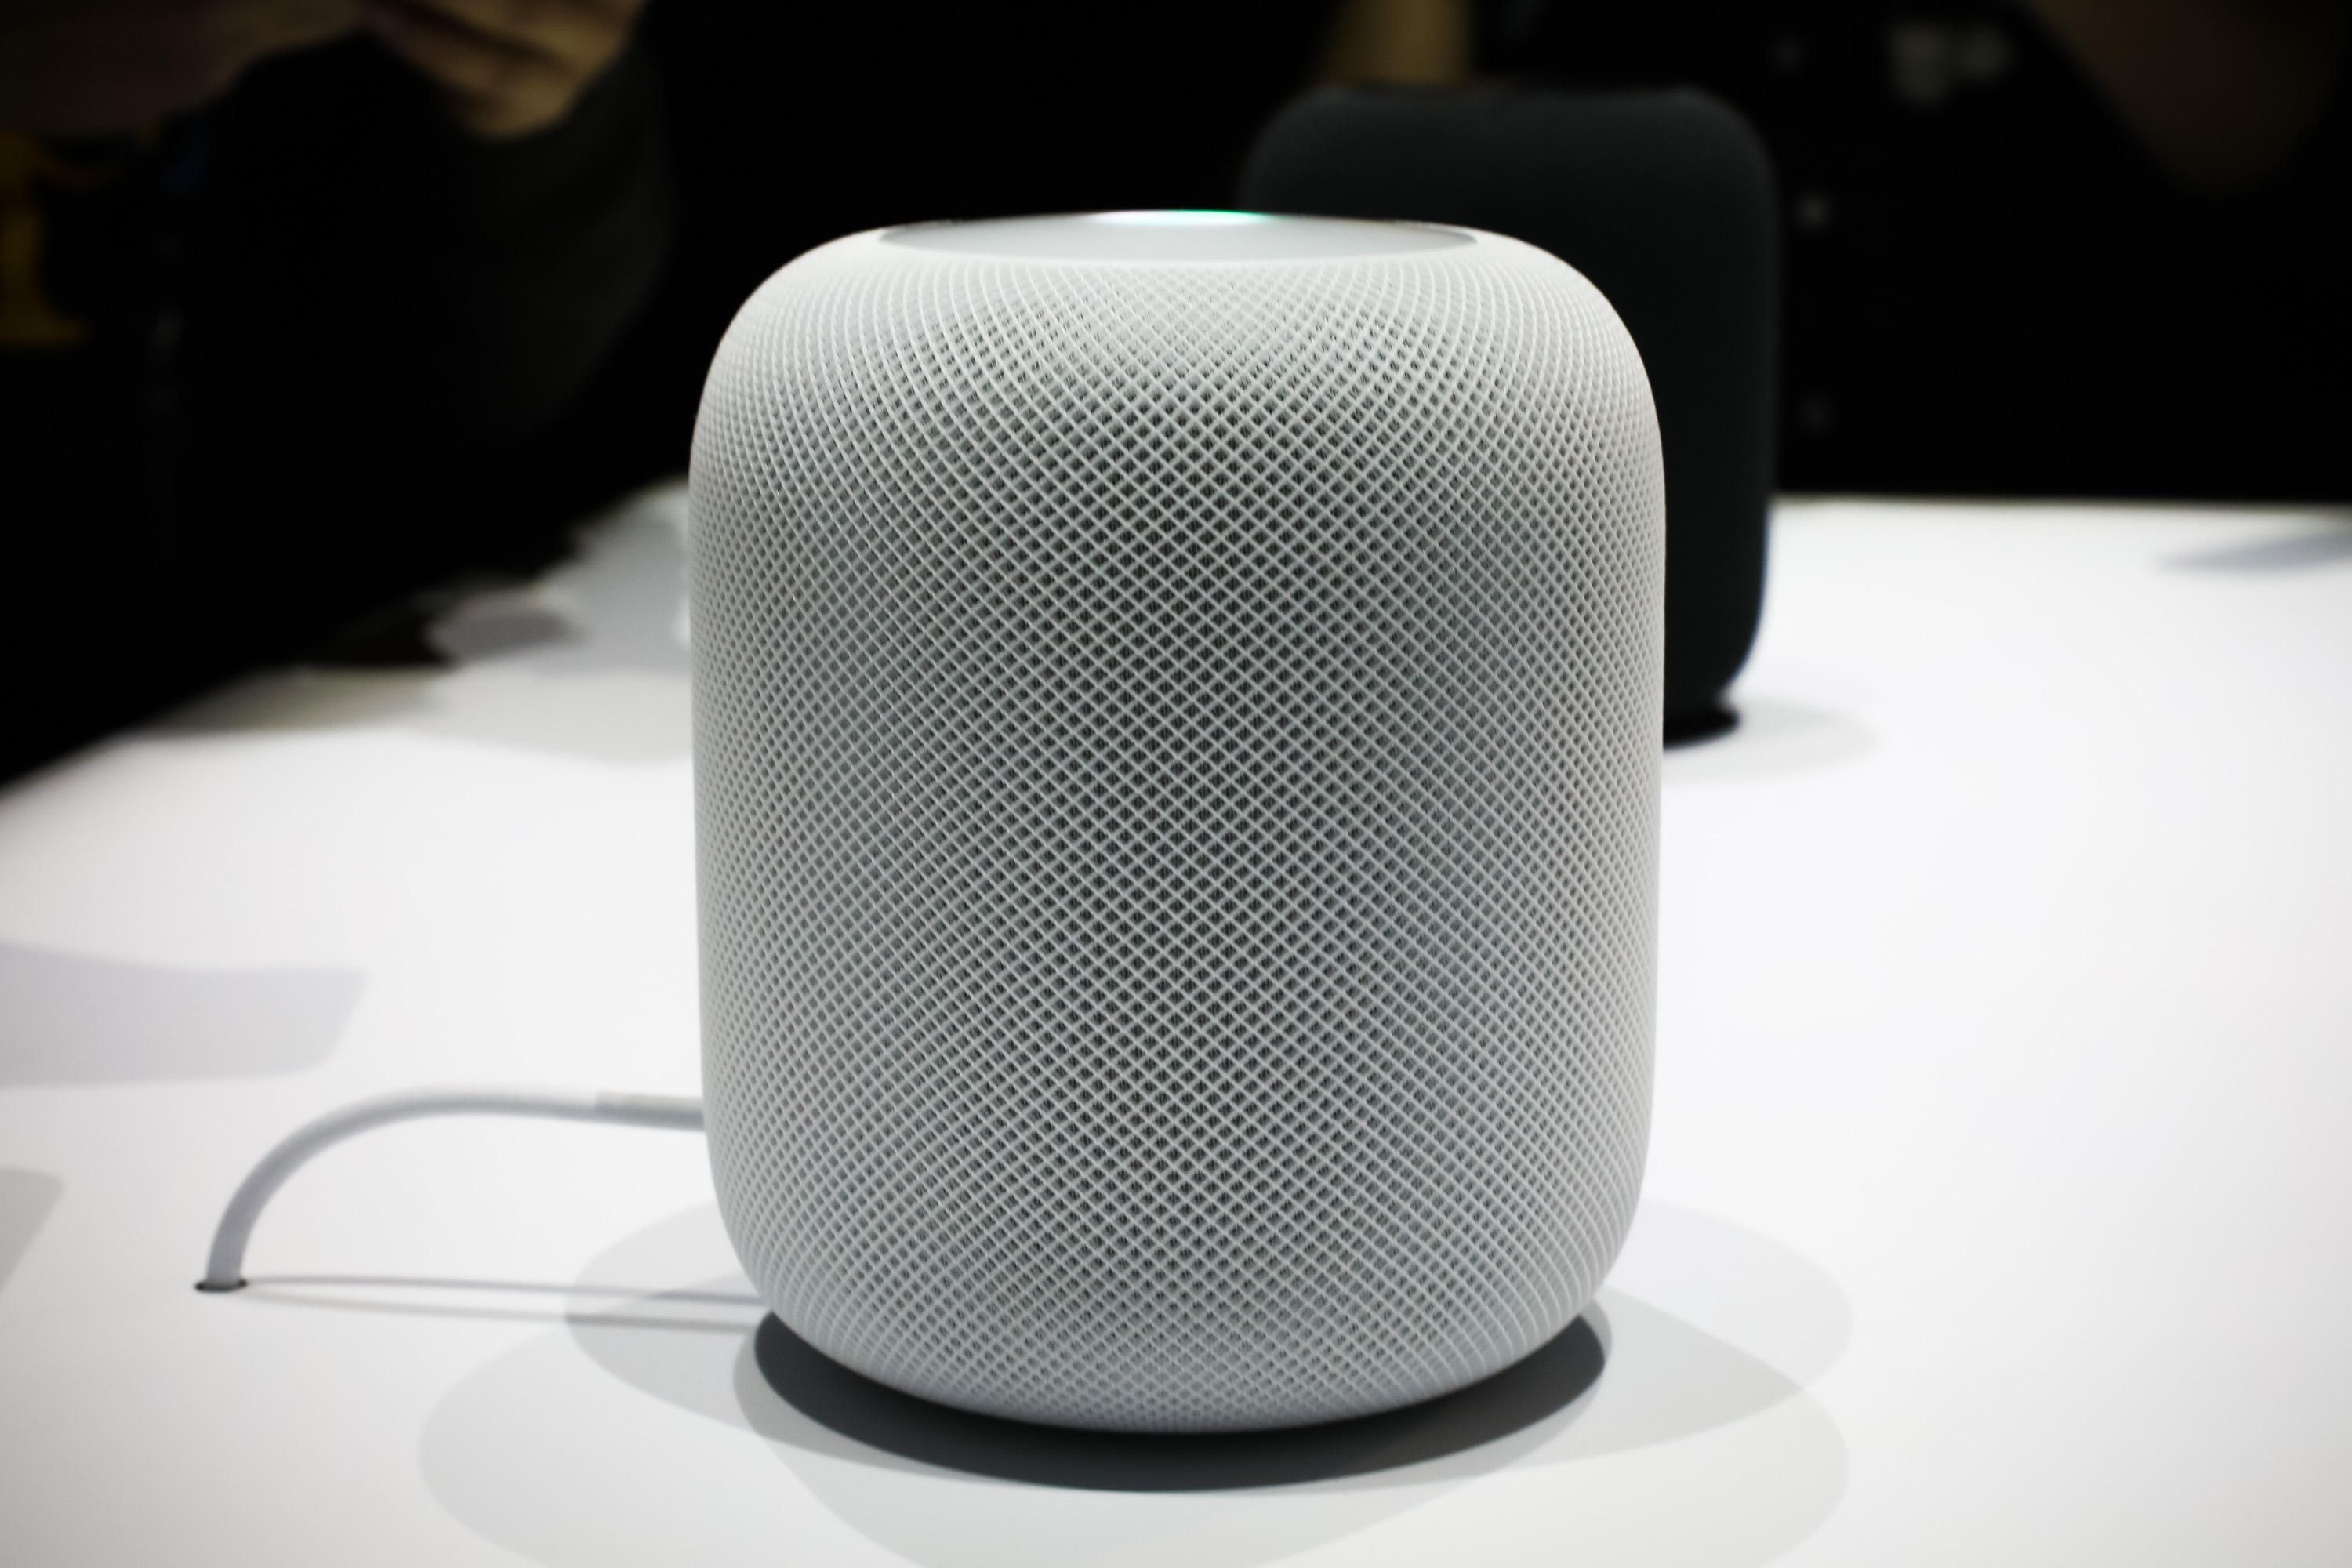 Apple’s HomePod receives FCC approval